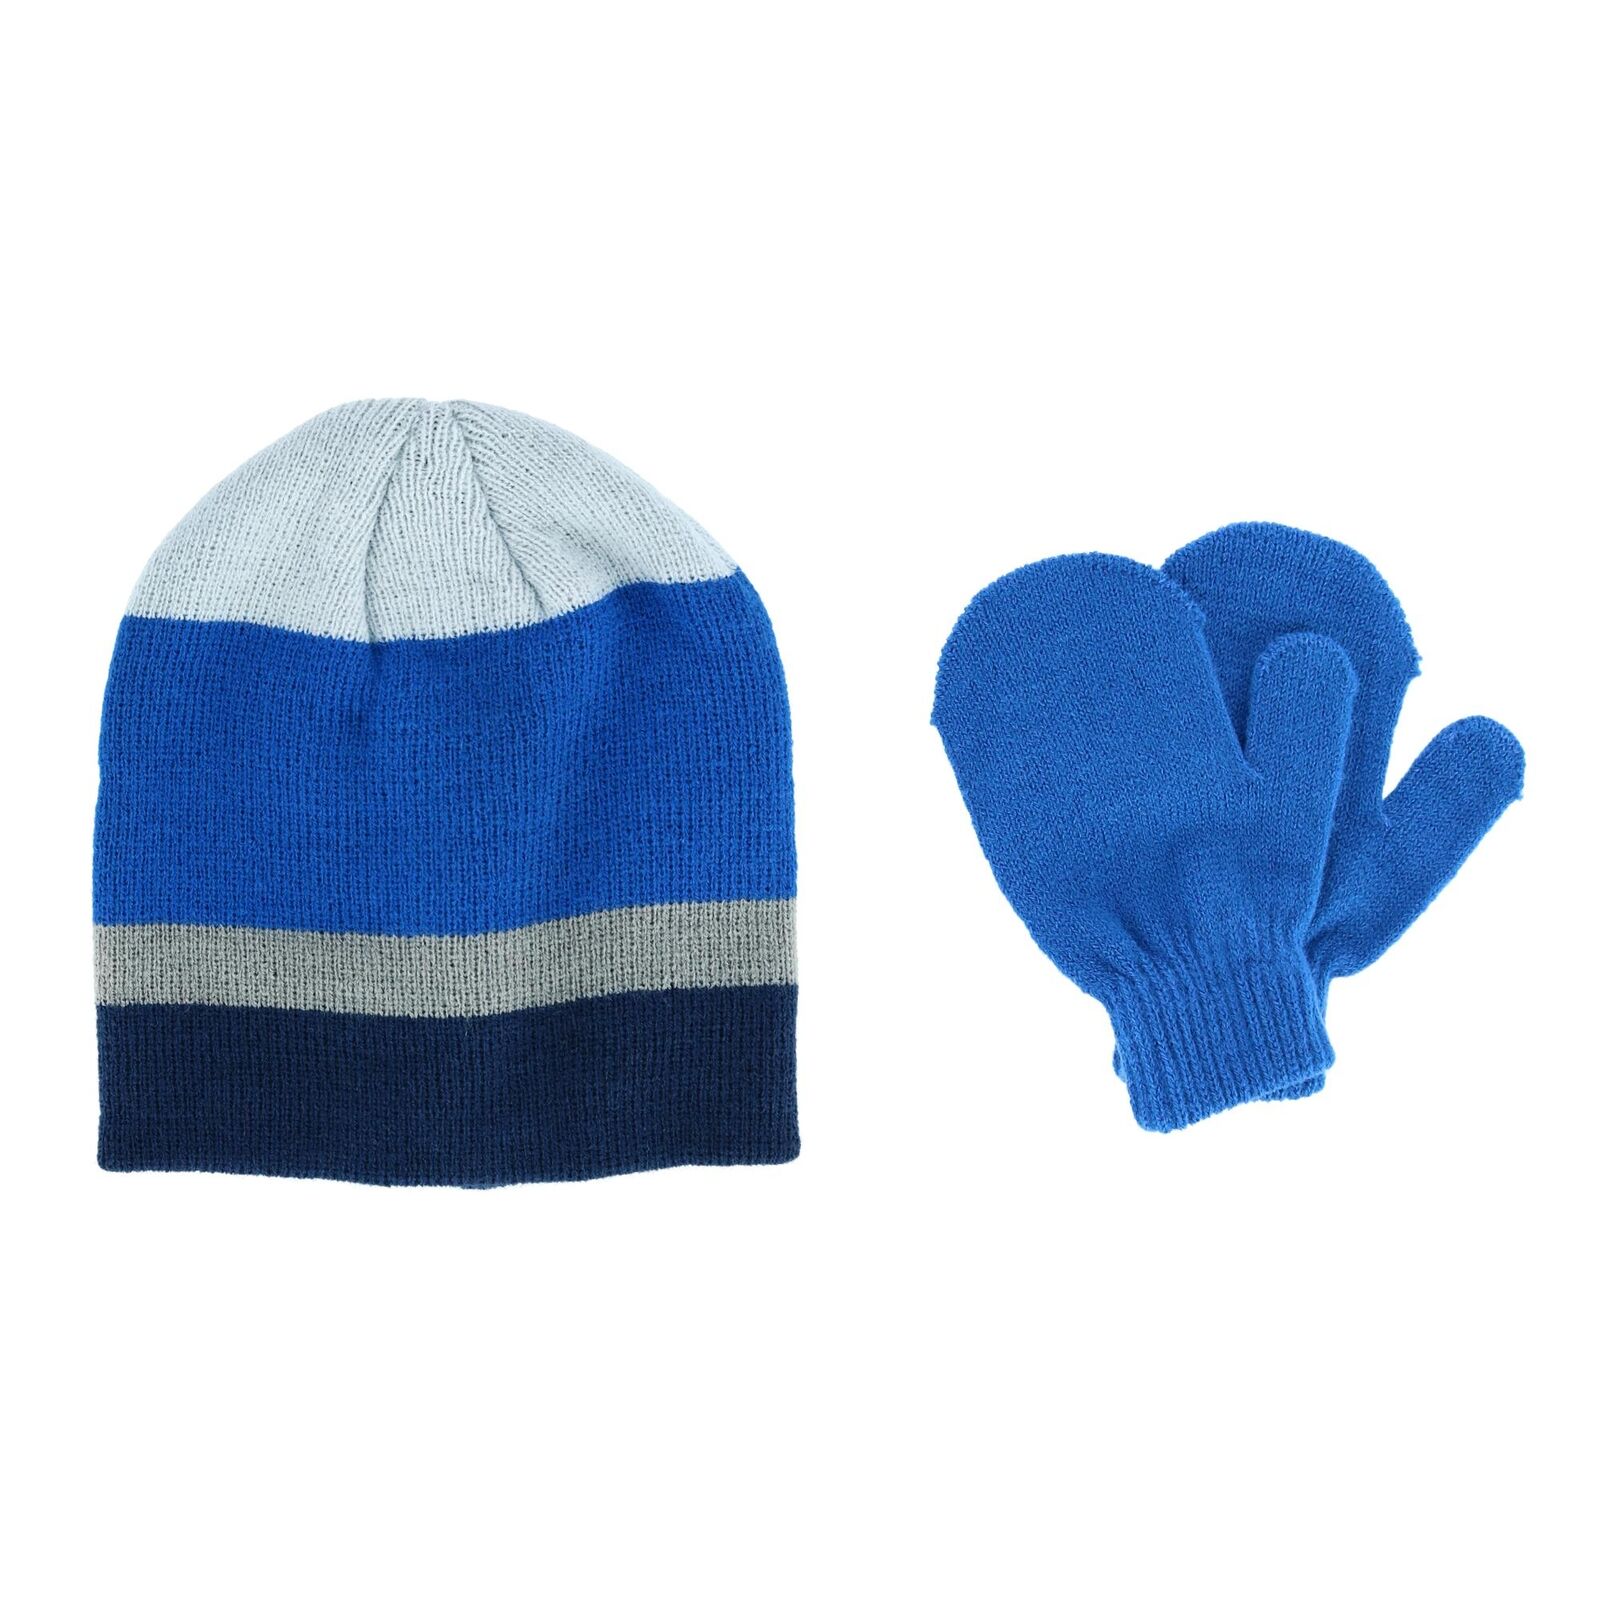 New Grand Sierra Toddler Boys' 2-4 Striped Acrylic Knit Hat And Mitten Set